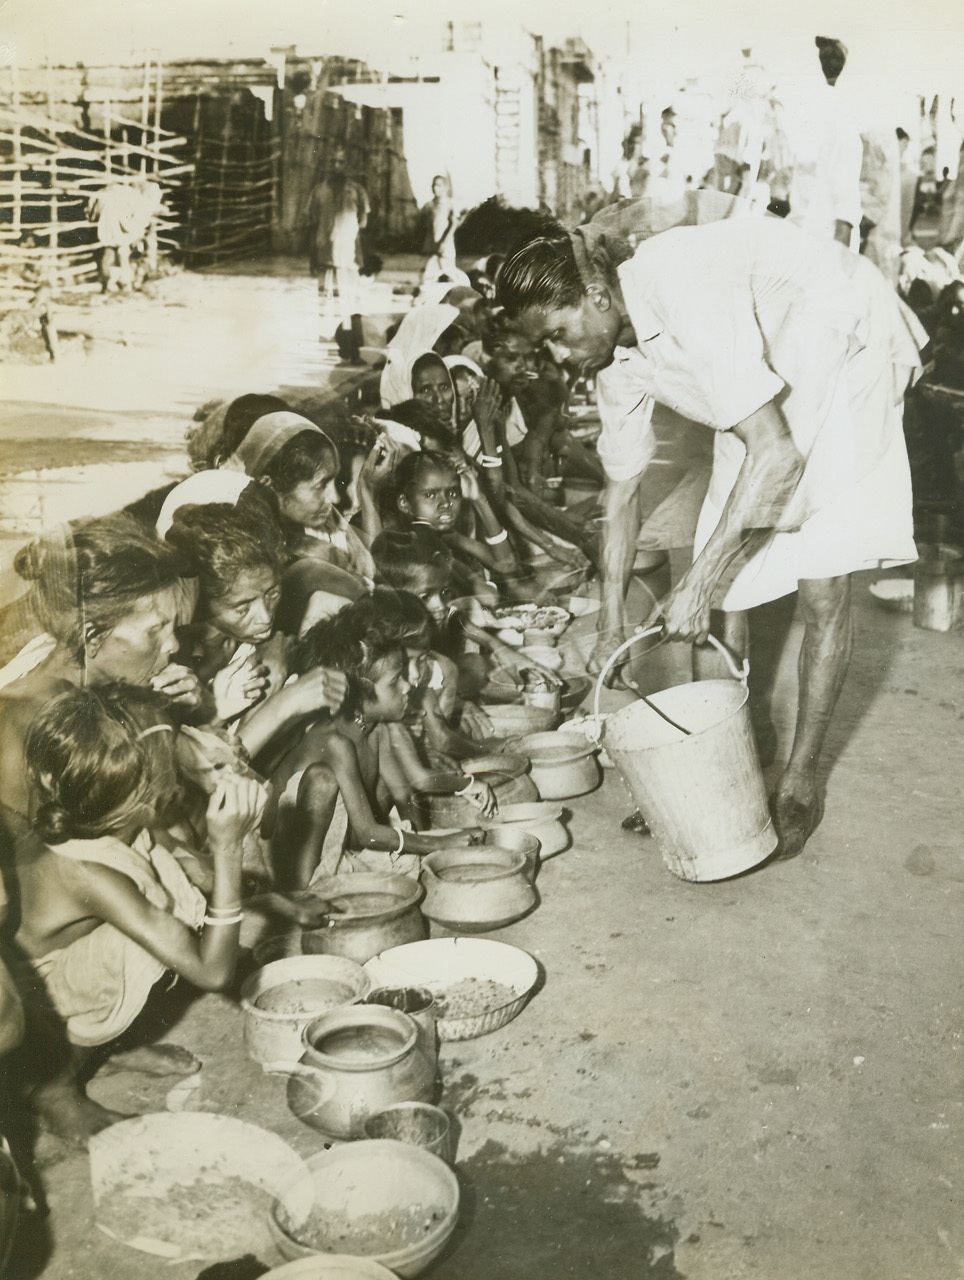 12/17/1943. By last week, an estimated 1,000,000 persons had died of starvation in India and, although the British government reportedly has the situation under control that number will undoubtedly be raised before the final, tragic count is taken.  Just released, these startling pictures were taken in Calcutta at the peak of India’s famine in late October when a homeless army of 100,000 roamed the city, dying in the streets. New York Bureau Squalid eating conditions mean nothing to India’s starving who stuff the free cereal in their mouths with their hands.  The food won’t be enough to bring their deformed bodies back to normalcy. Credit line (ACME);